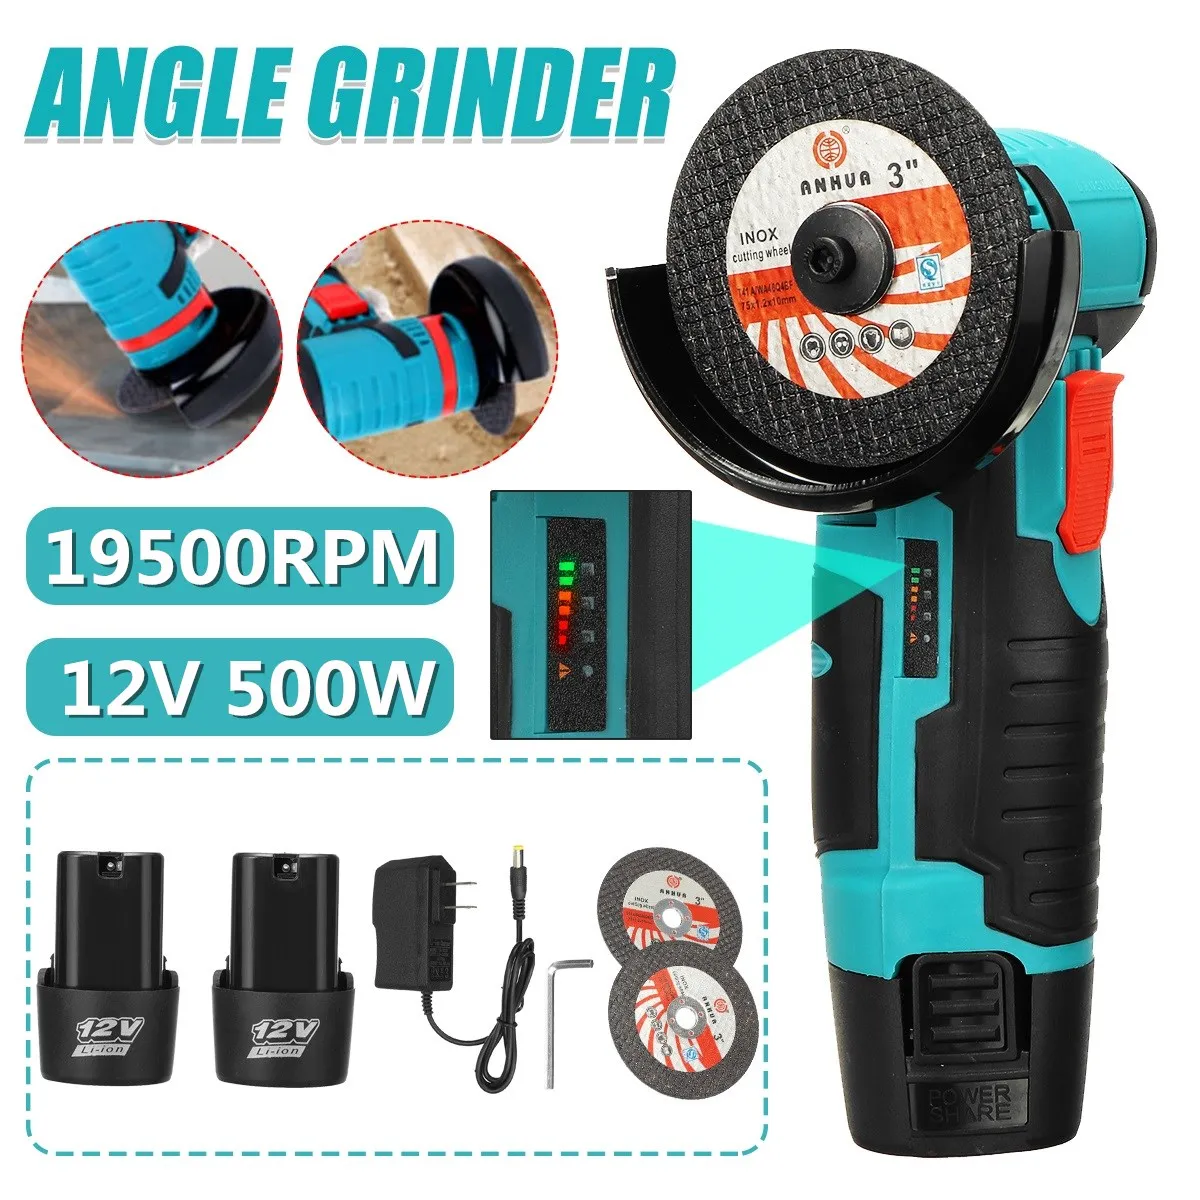 

12V 500W Brushless Angle Grinder 19500RPM Electric Polishing Grinding Machine Polishing Machine Diamond Cutting Power Tool